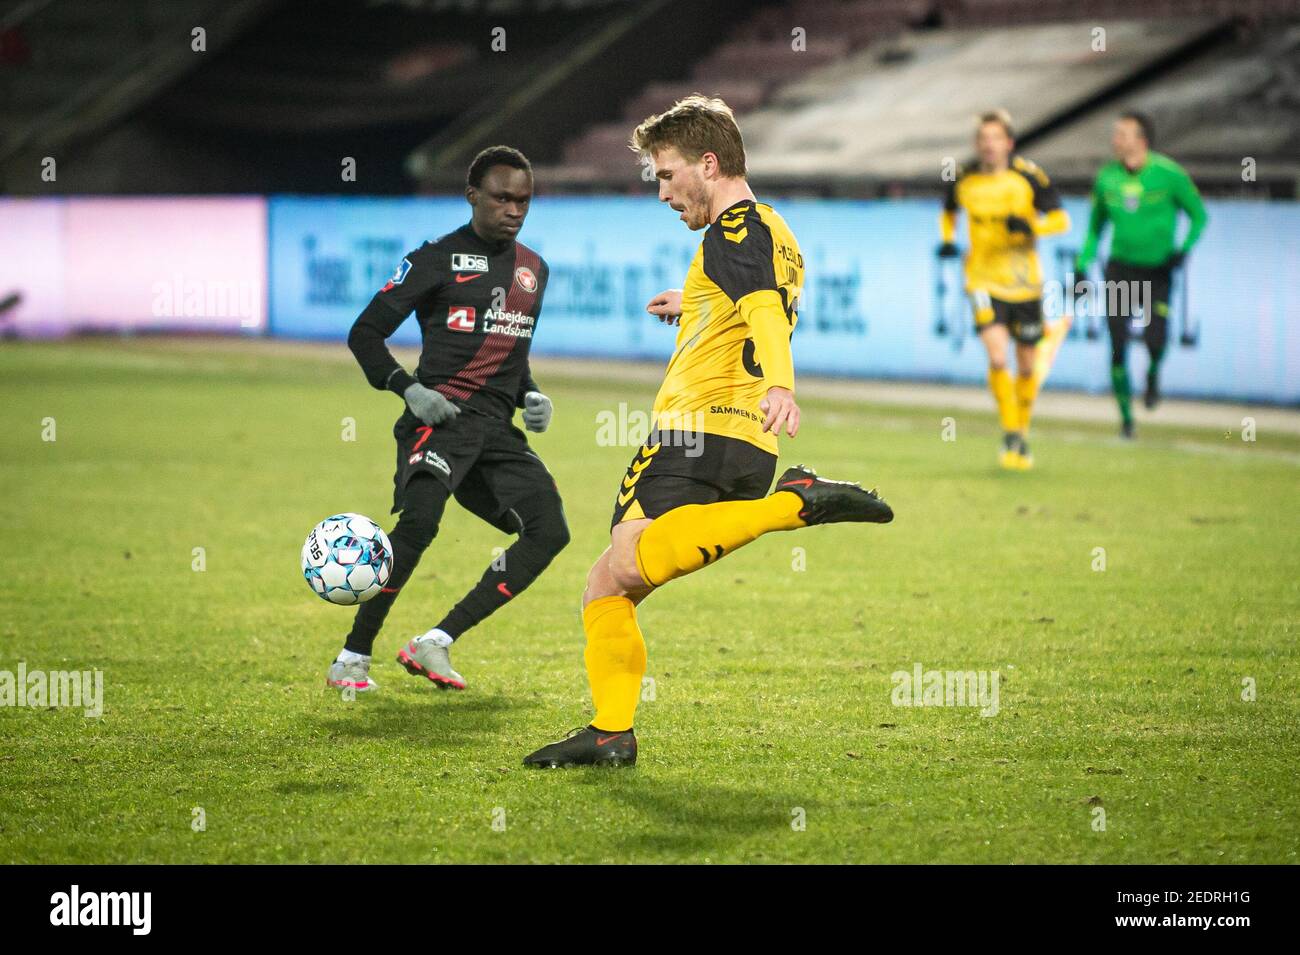 Herning, Denmark. 14th Feb, 2021. Alexander Ludwig (33) AC Horsens seen during the 3F Superliga match between FC Midtjylland and AC Horsens at MCH Arena in Herning. (Photo Credit: Gonzales Photo/Alamy